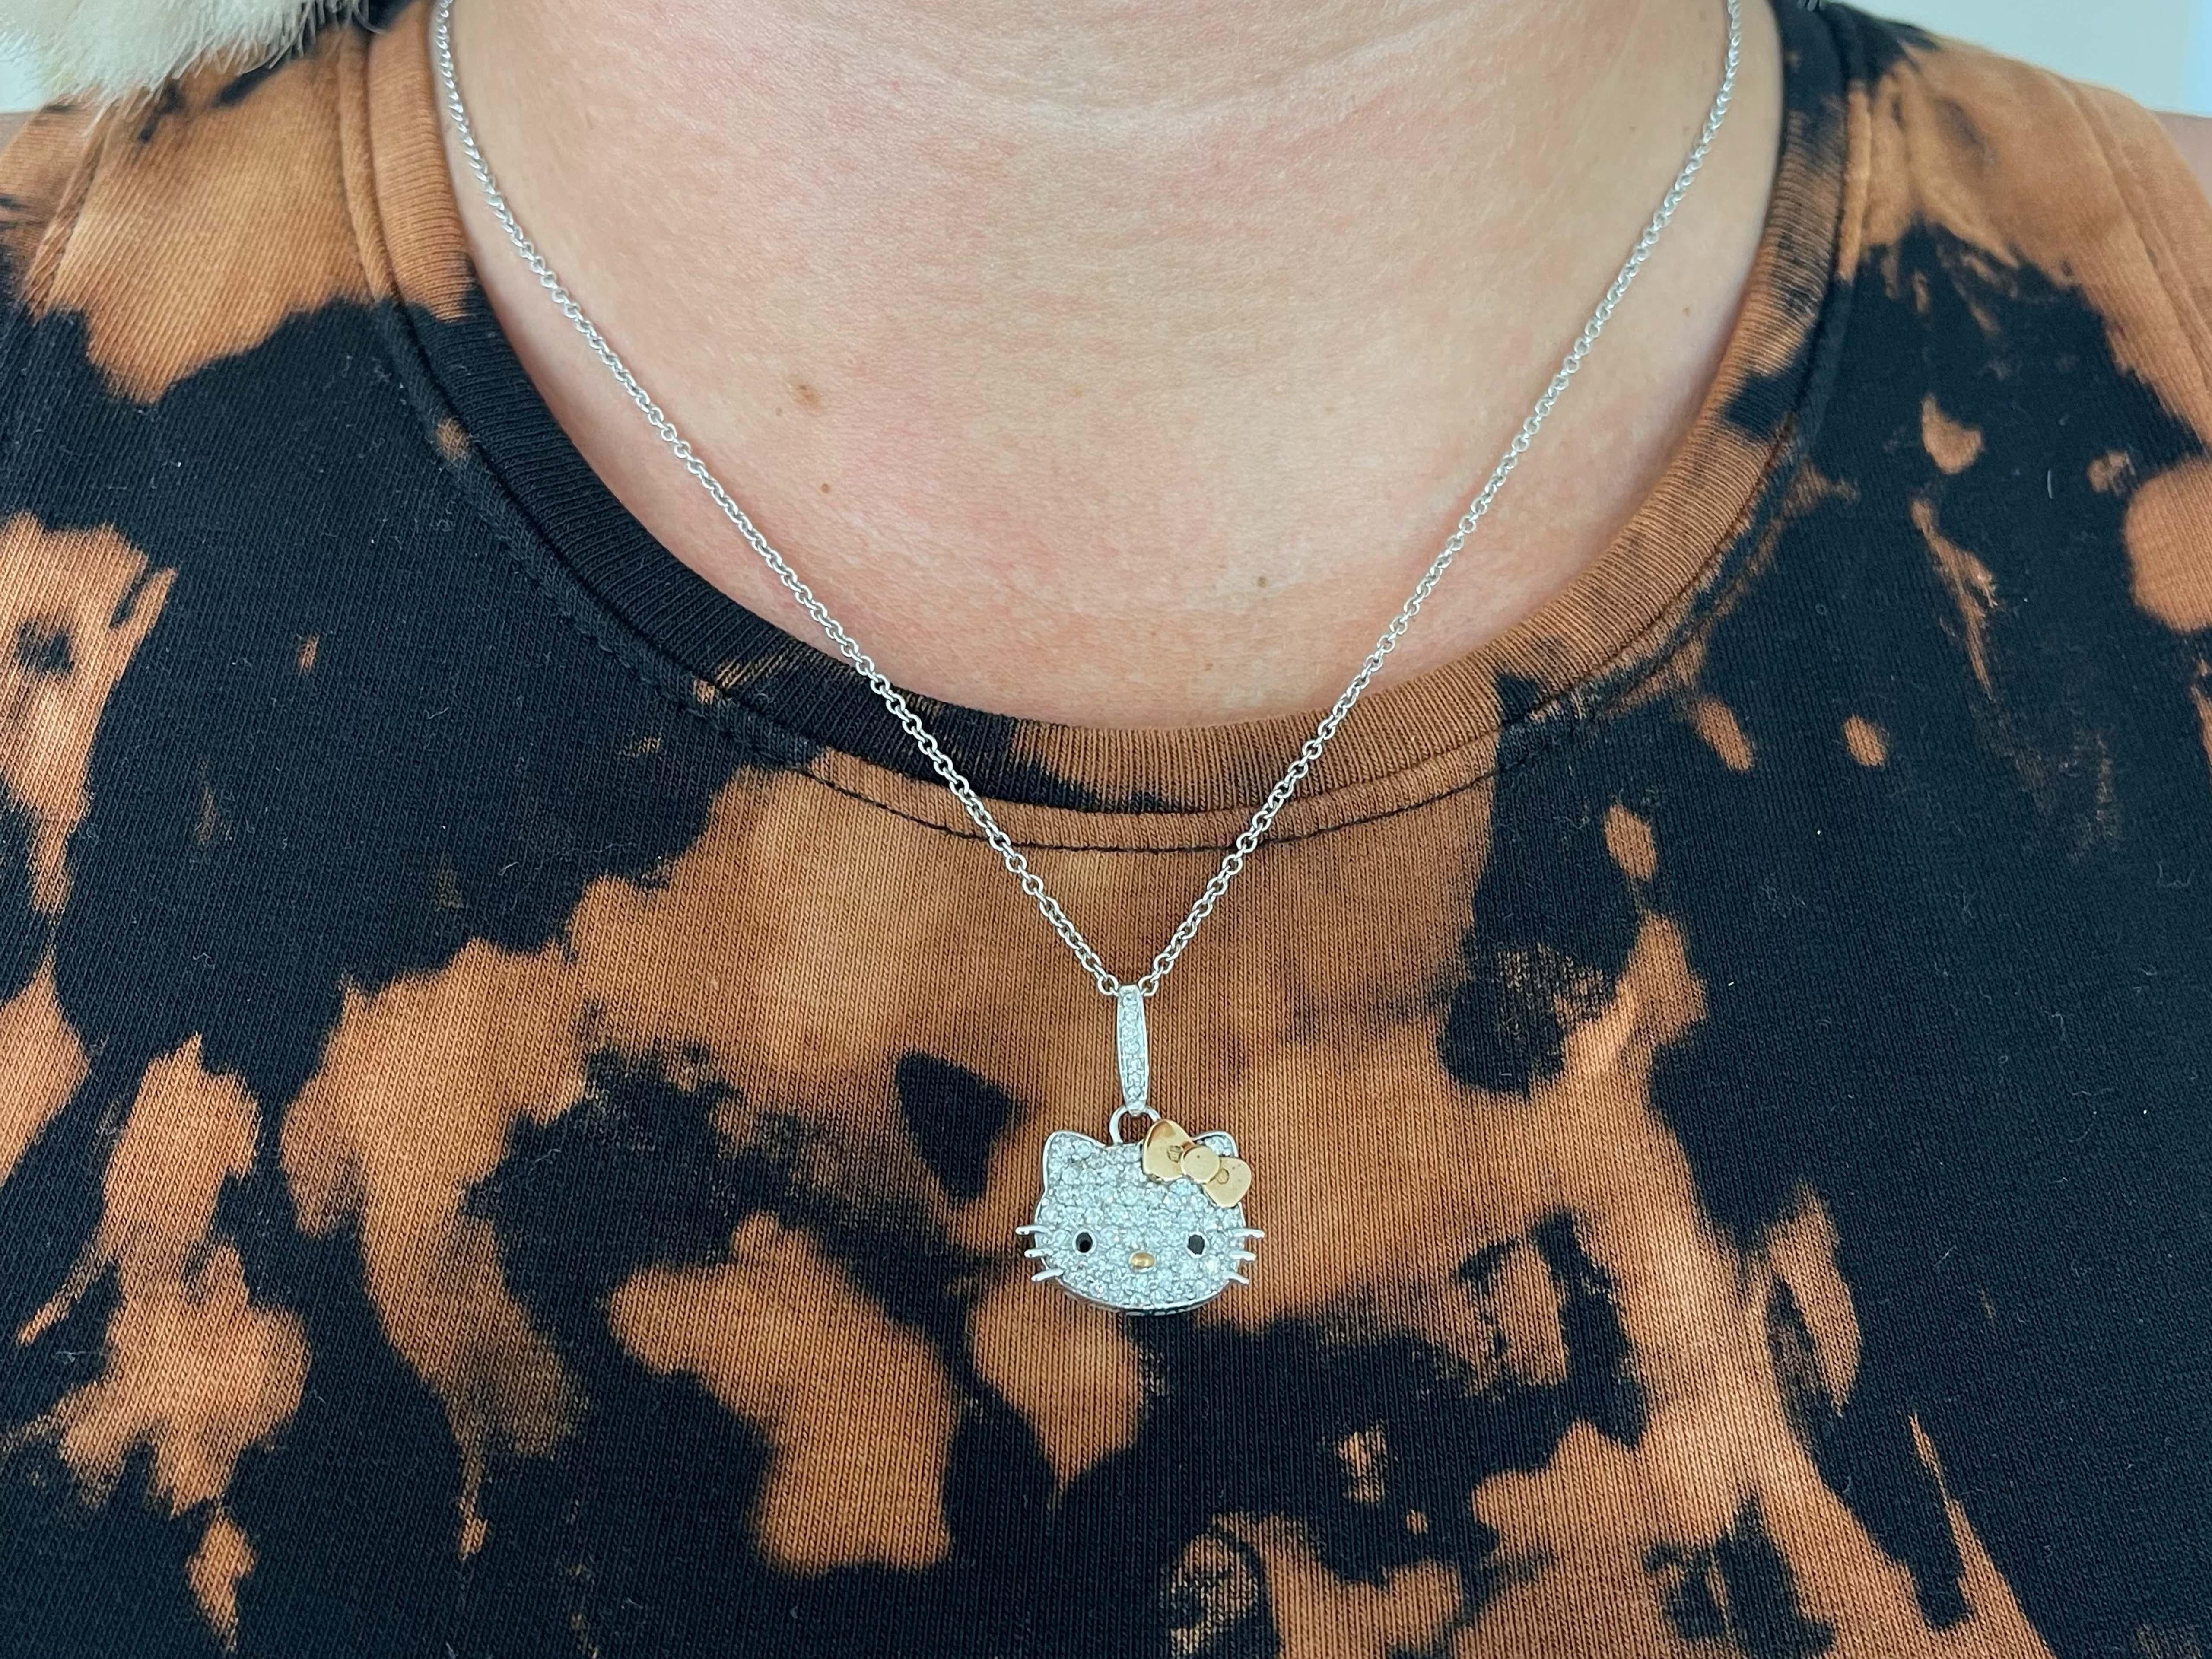 Authentic Sanrio Hello Kitty Diamond necklace in 18k white gold by Kimora Lee Simmons. This gorgeous Sanrio is beautifully crafted in 18K white gold and set with over 1.50 carats of high quality diamonds. The diamonds are F-G in color and VS in